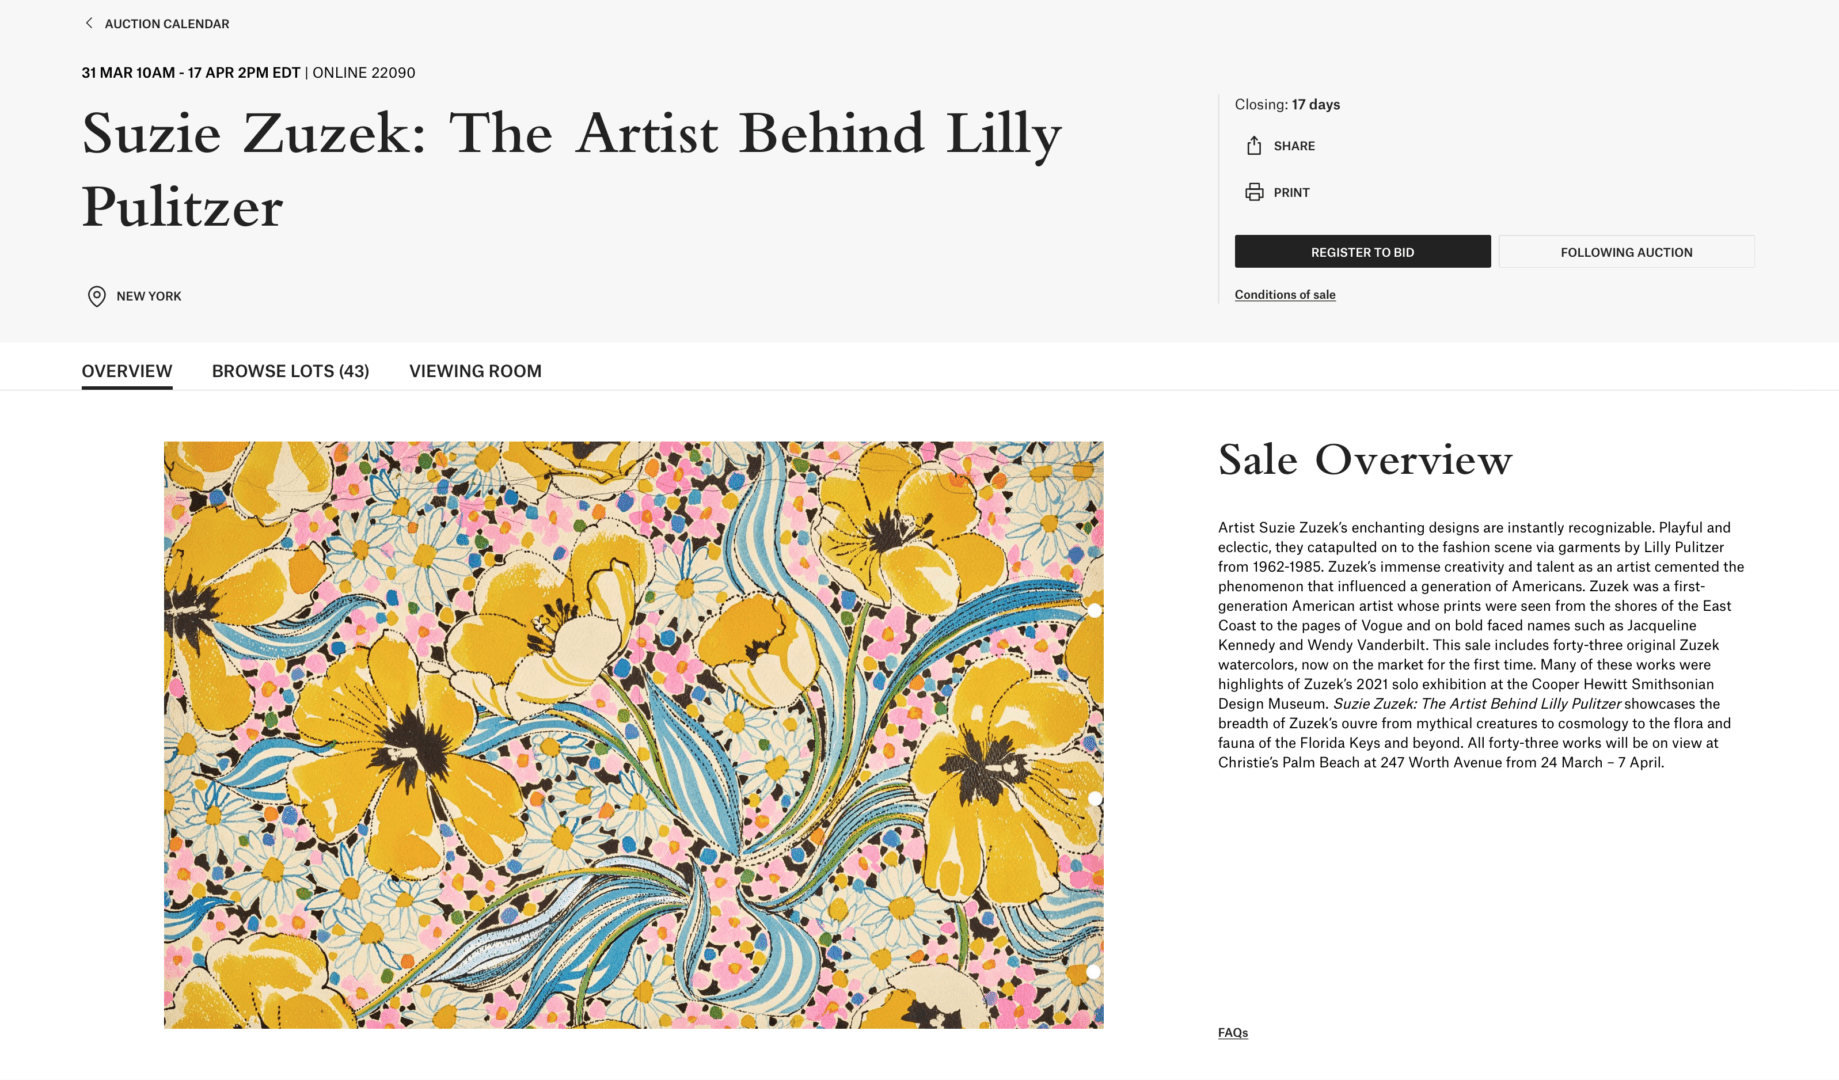 A screen shot of an article on the artist behind lilly.